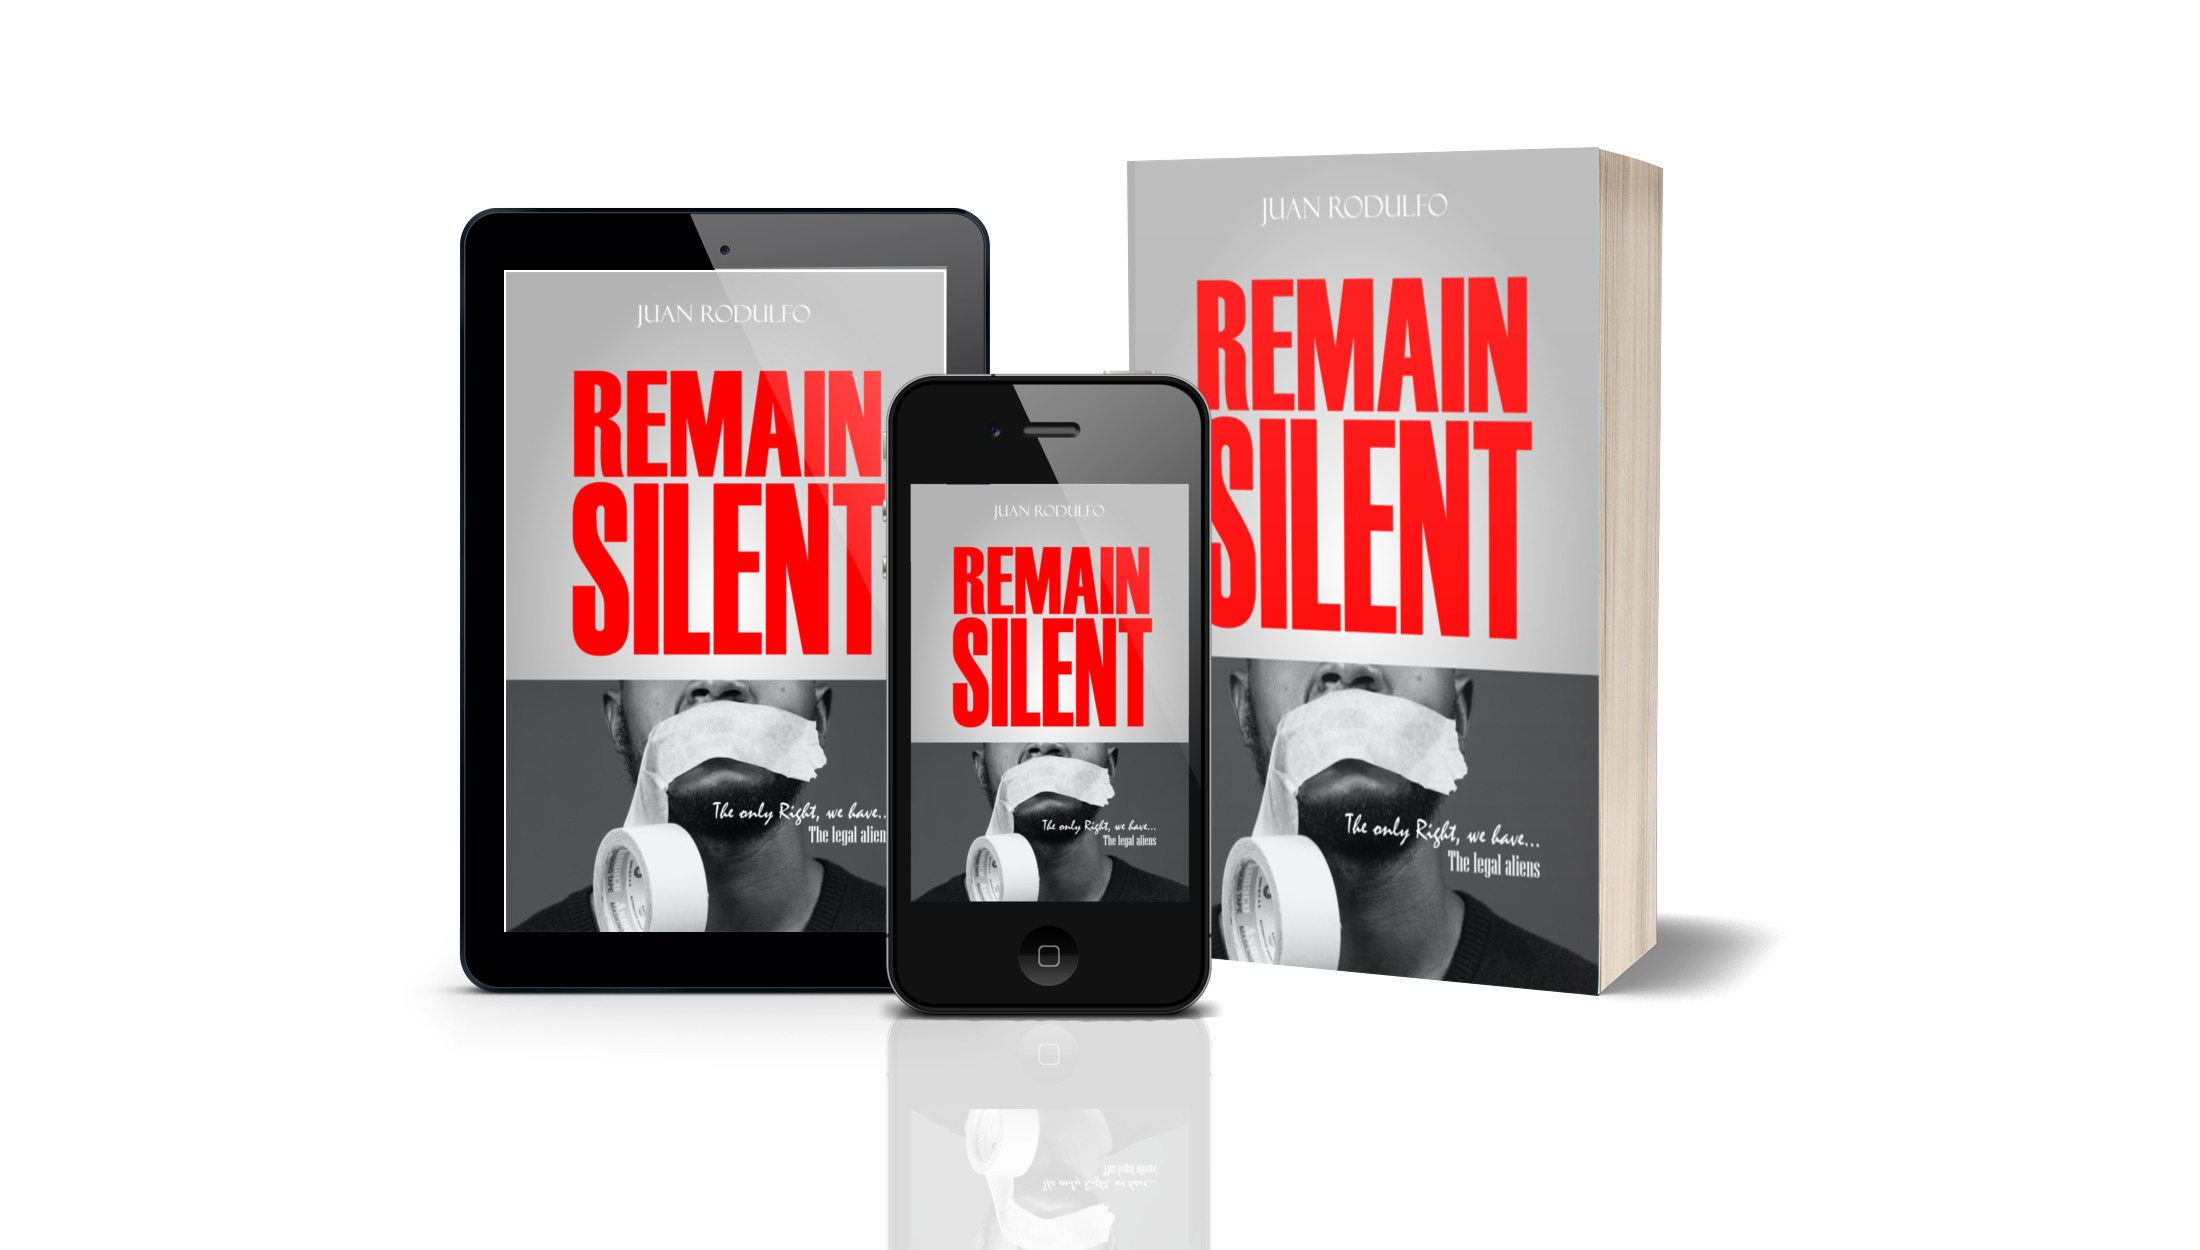 Remain Silent: The only right we have. The legal Aliens by Juan Rodulfo, remain silent, asylum seekers, Human Rights, Immigration, US Immigration, Legal Aliens, US Border, freedom, Juan Rodulfo,